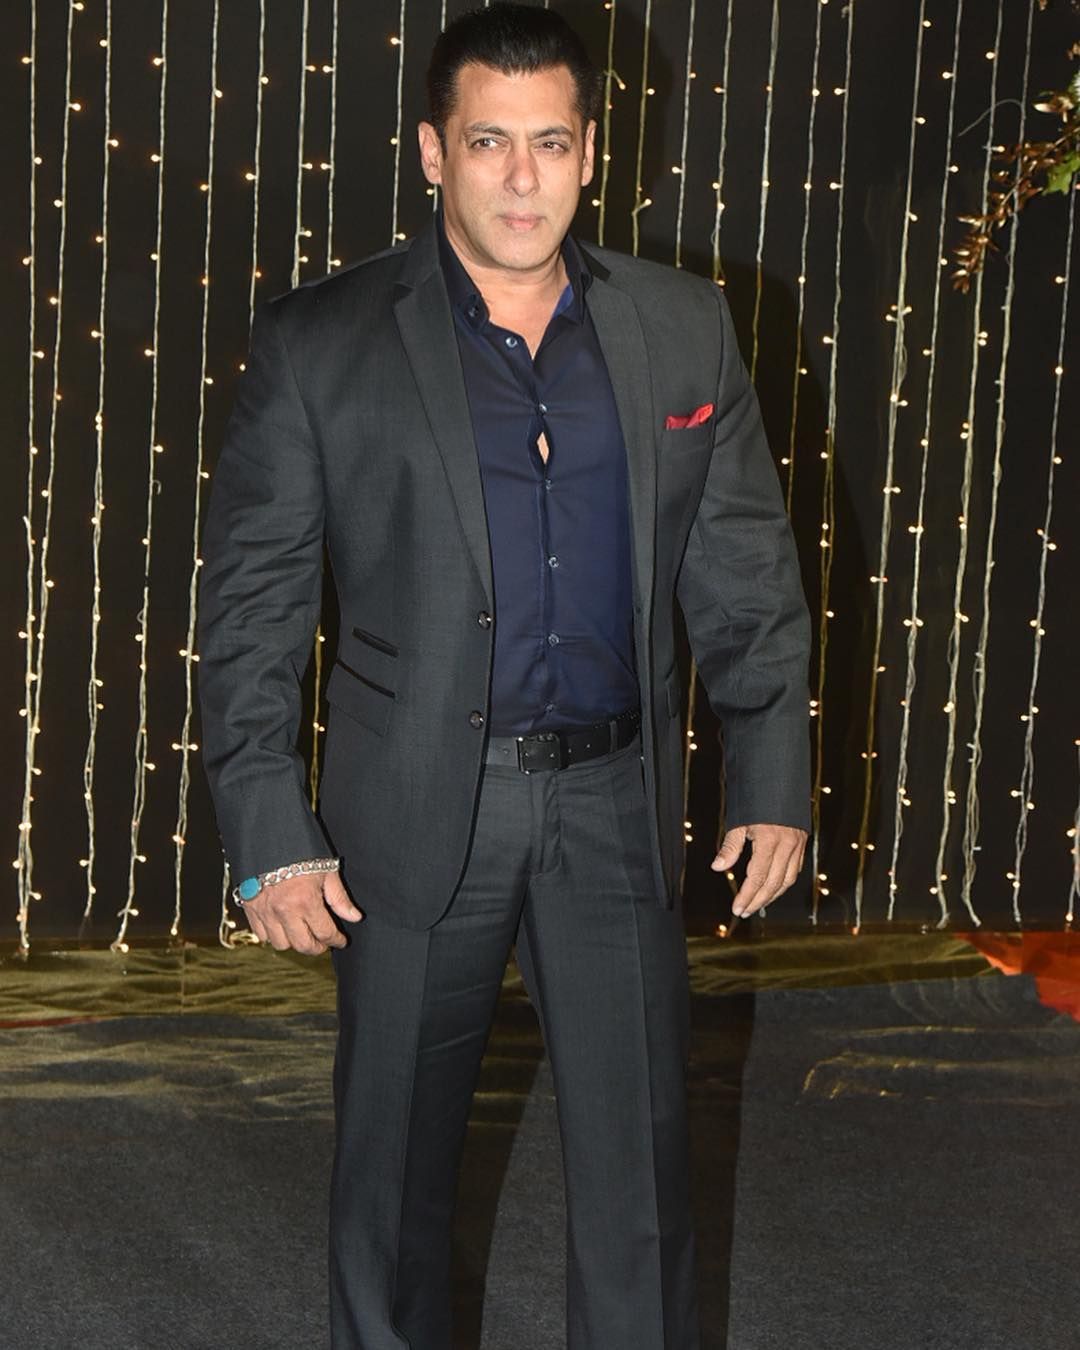 Salman Khan Cancels Annual Birthday Bash Owning To The Pandemic, A First In Many Years